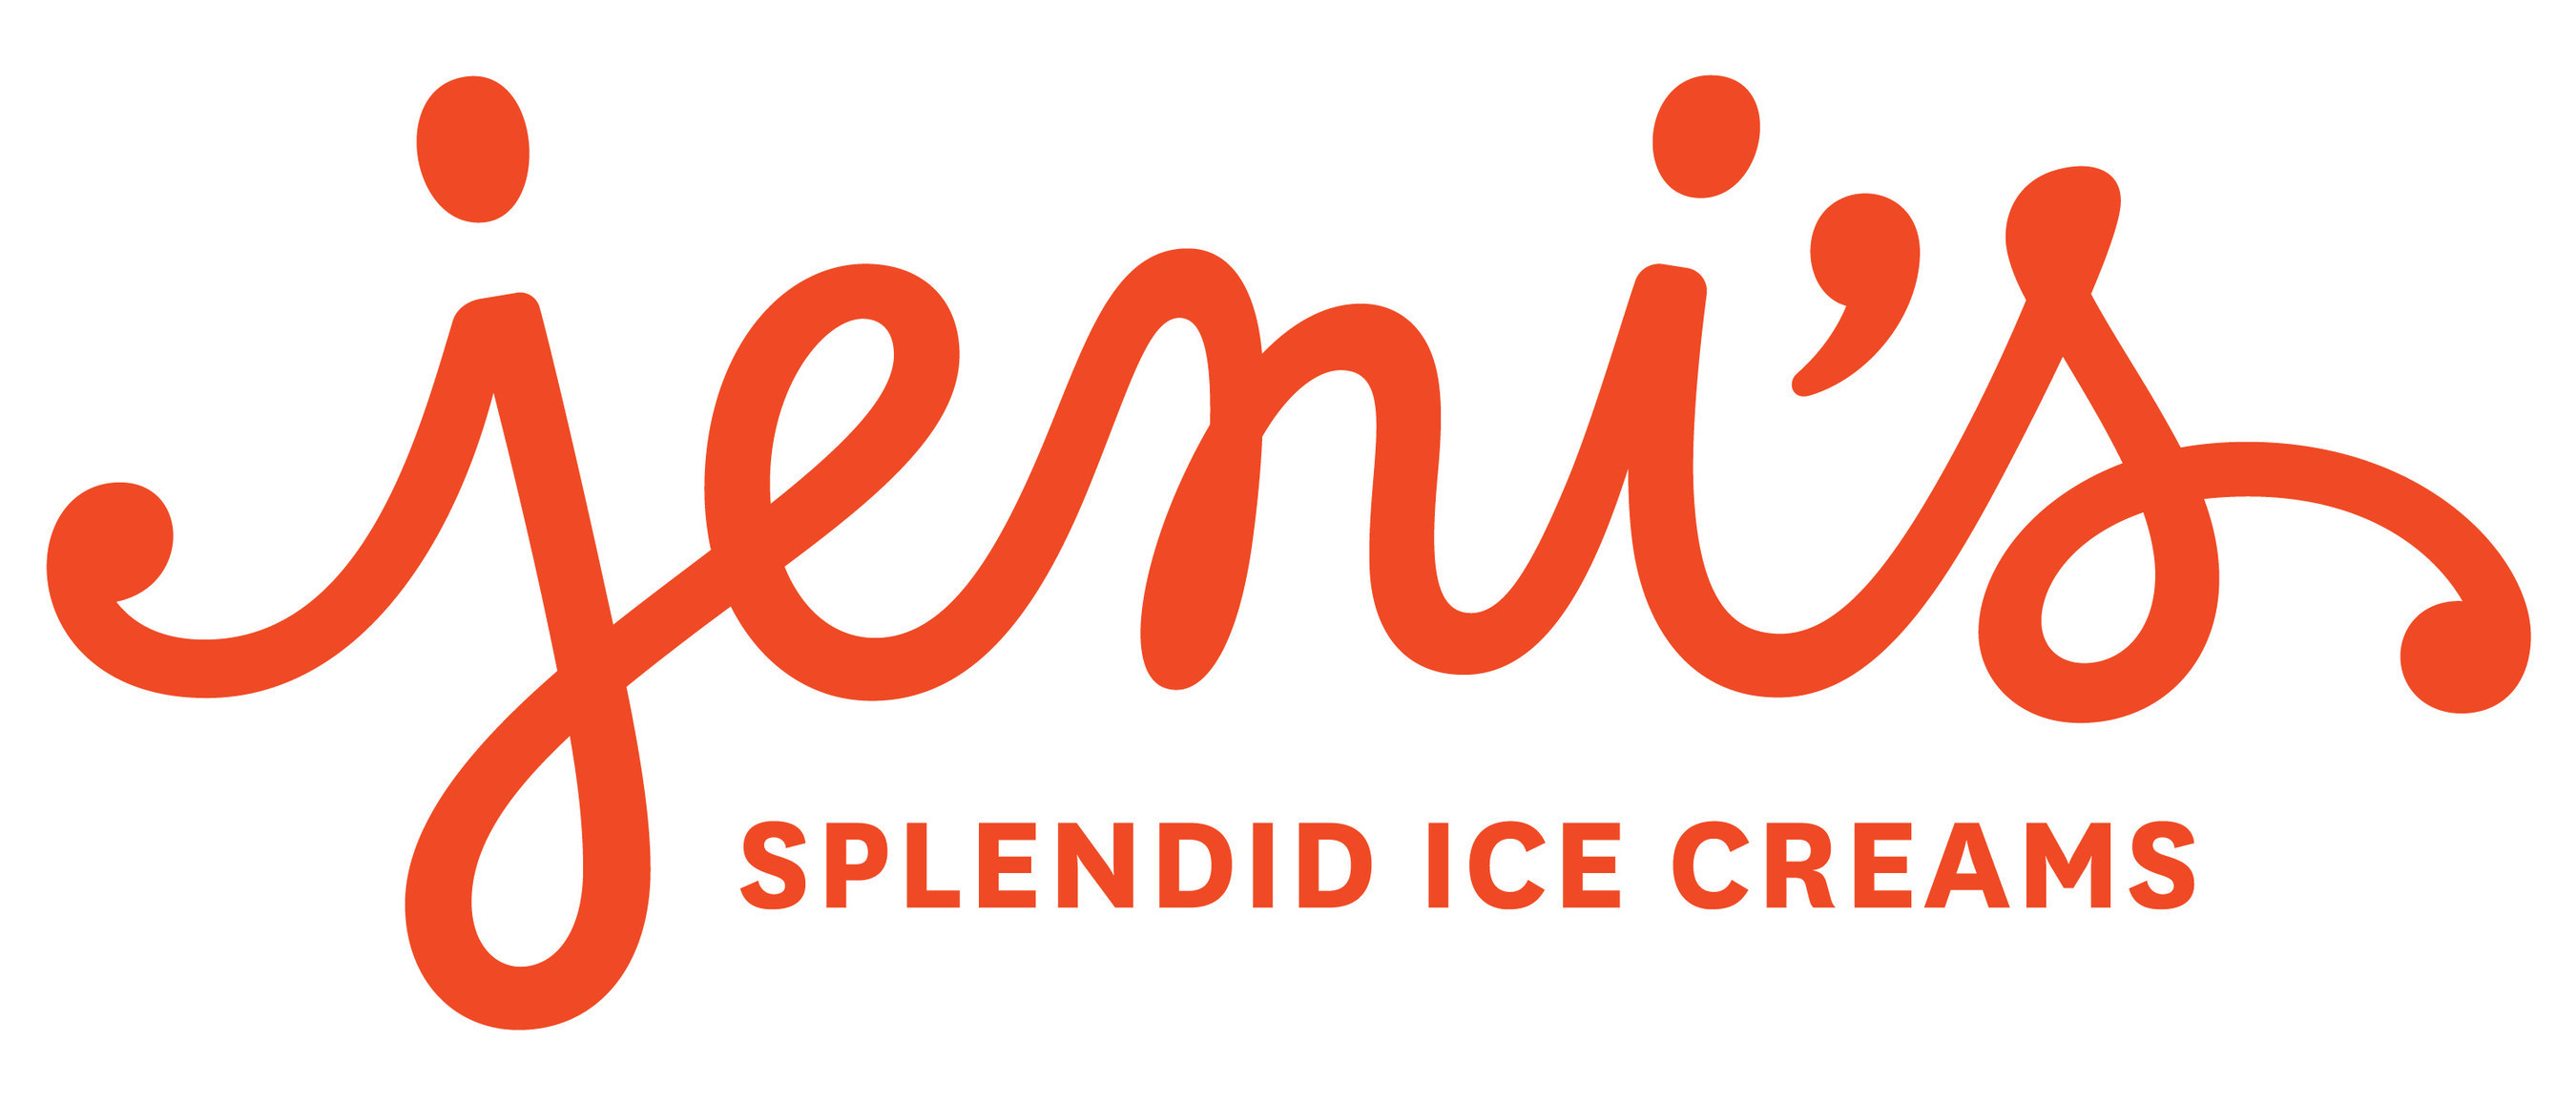 JENI'S NEW SUMMER FLAVORS ARE HERE TO BRING THE COOL BACK TO THE POOL